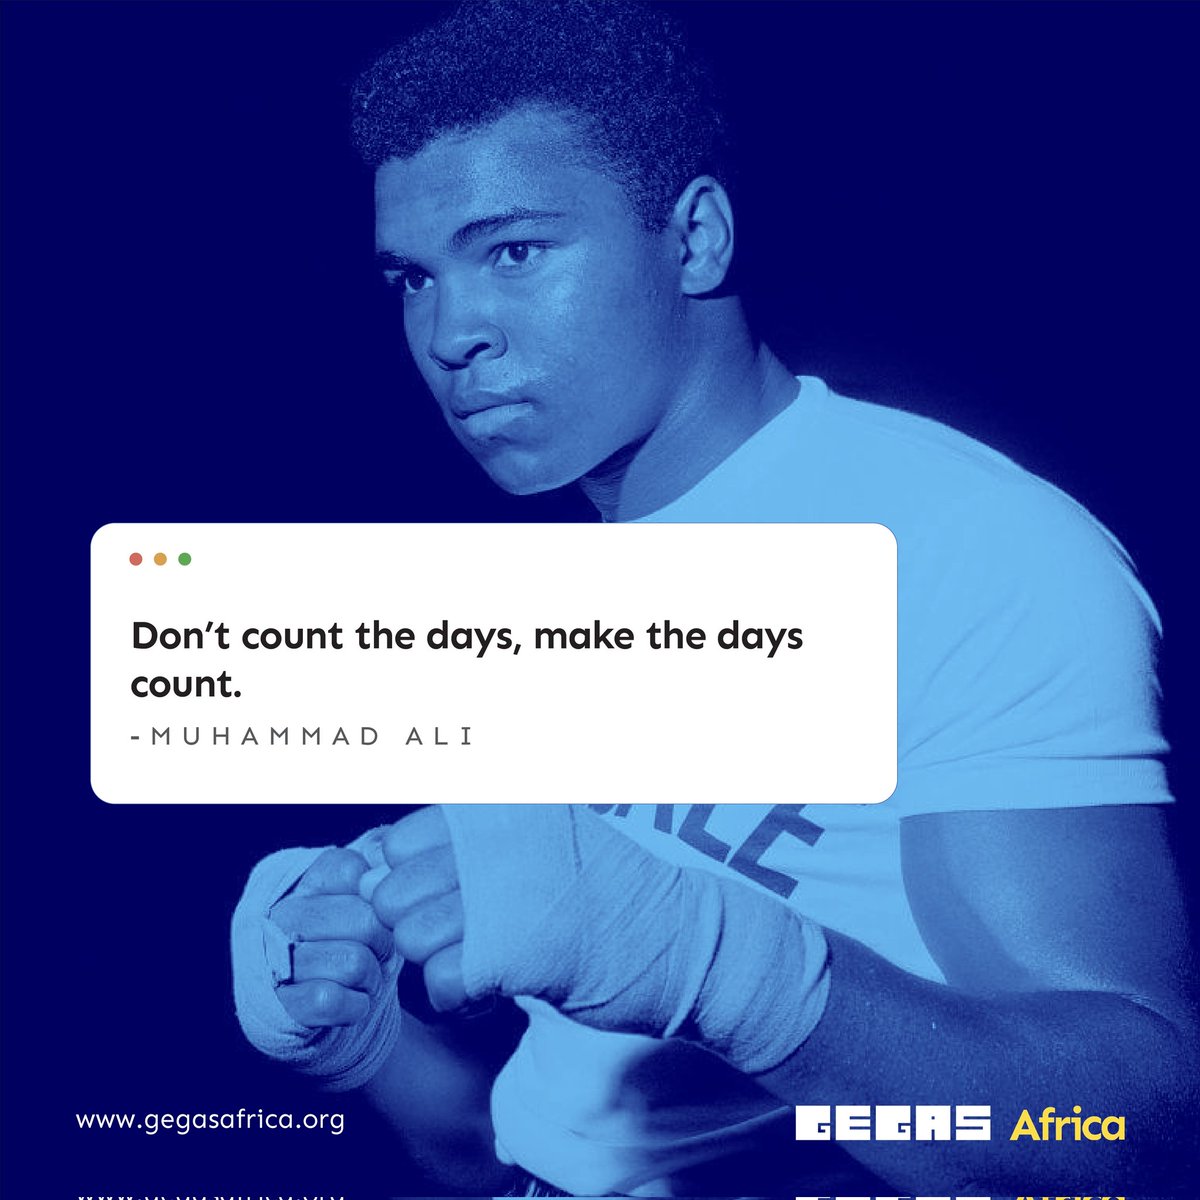 #MondayMotivation📌
Not counting the days but making the days count is you letting your actions speak louder than the passing of time. This week and ahead, make each day count.💪